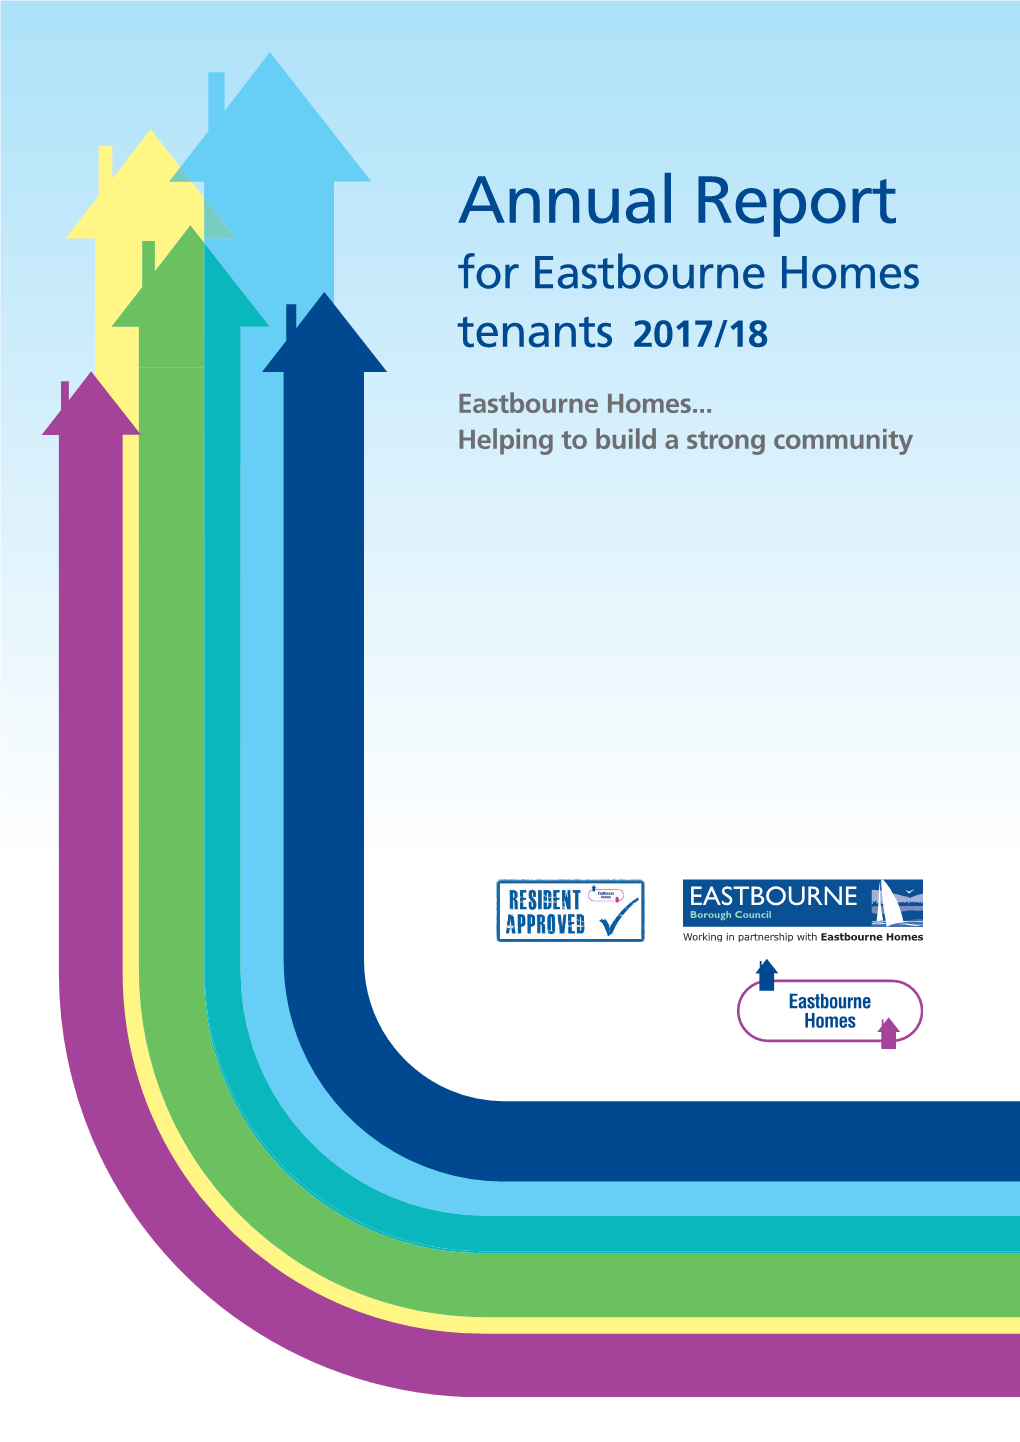 Annual Report for Eastbourne Homes Tenants 2017/18